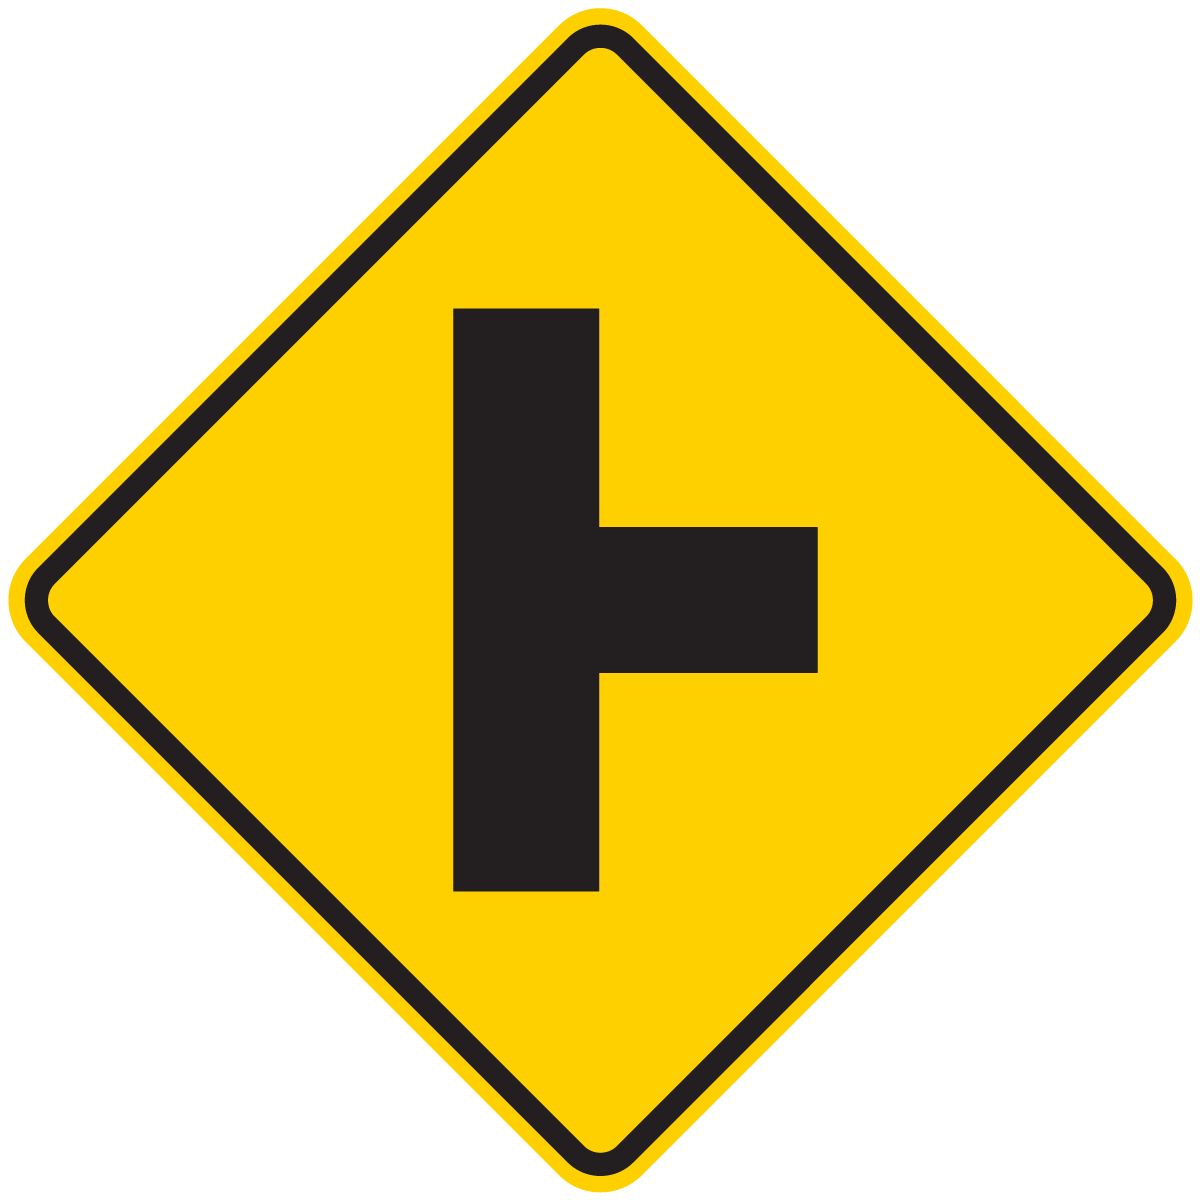 W2-2 Side Road Intersection (Left or Right)